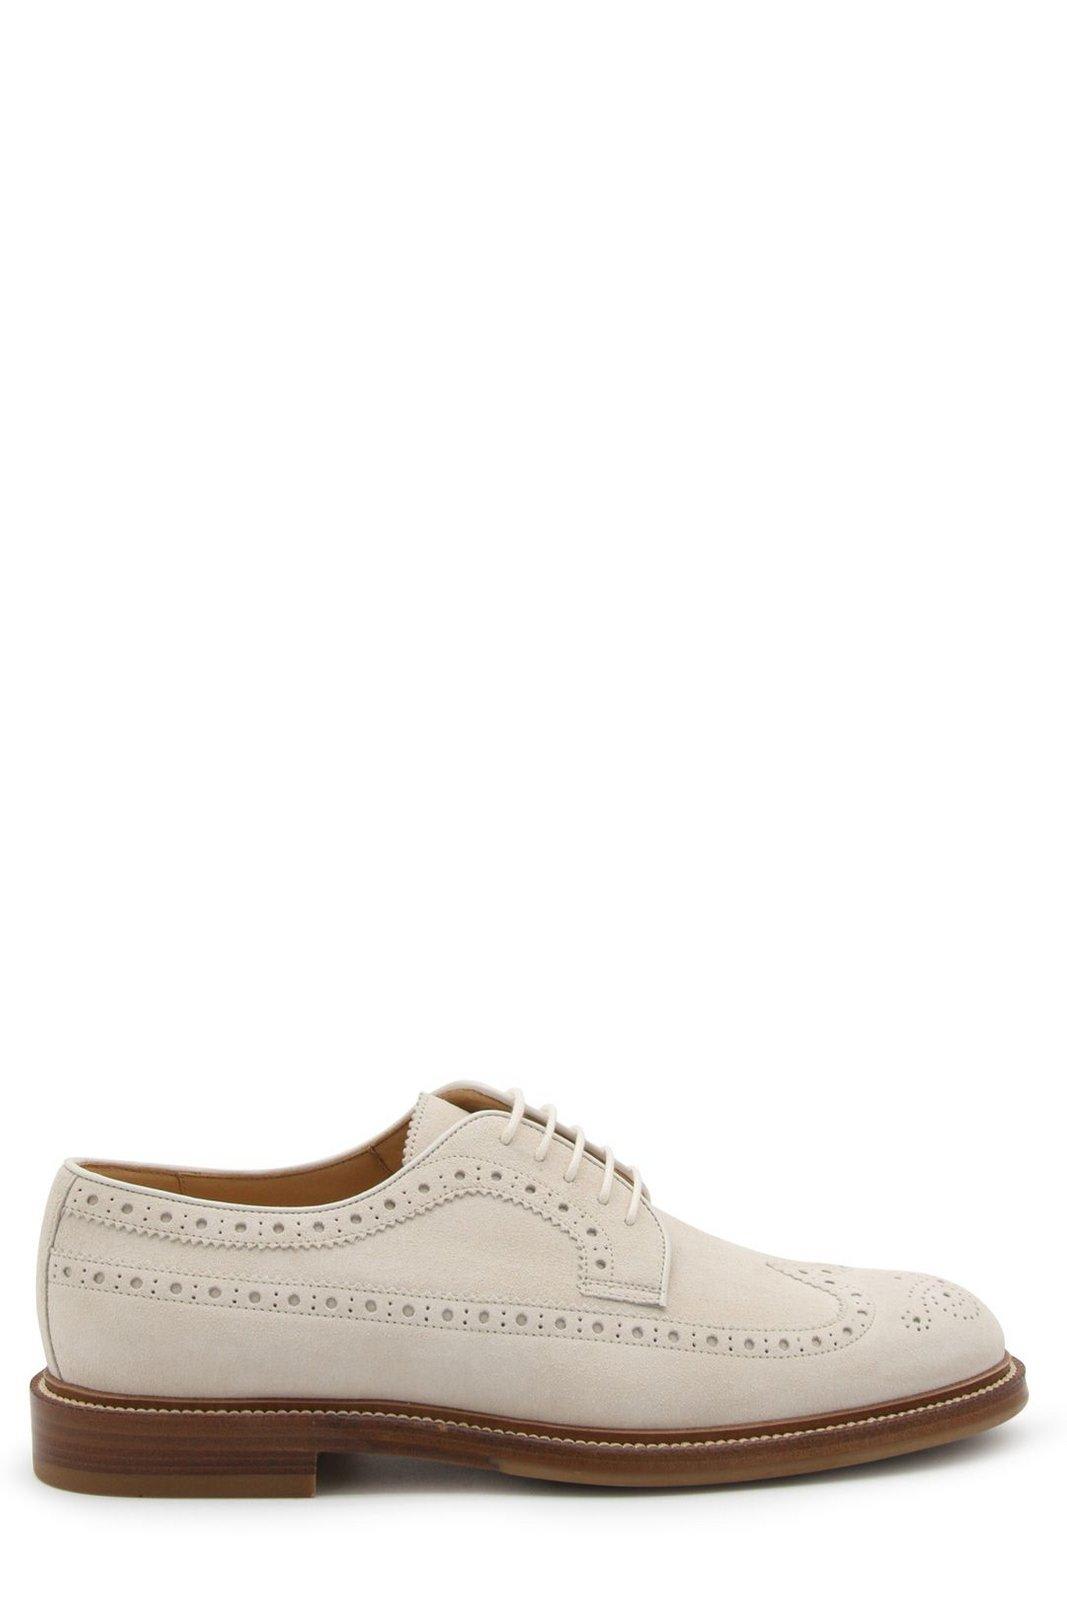 Brunello Cucinelli Perforated-embellished Lace-up Derby Shoes